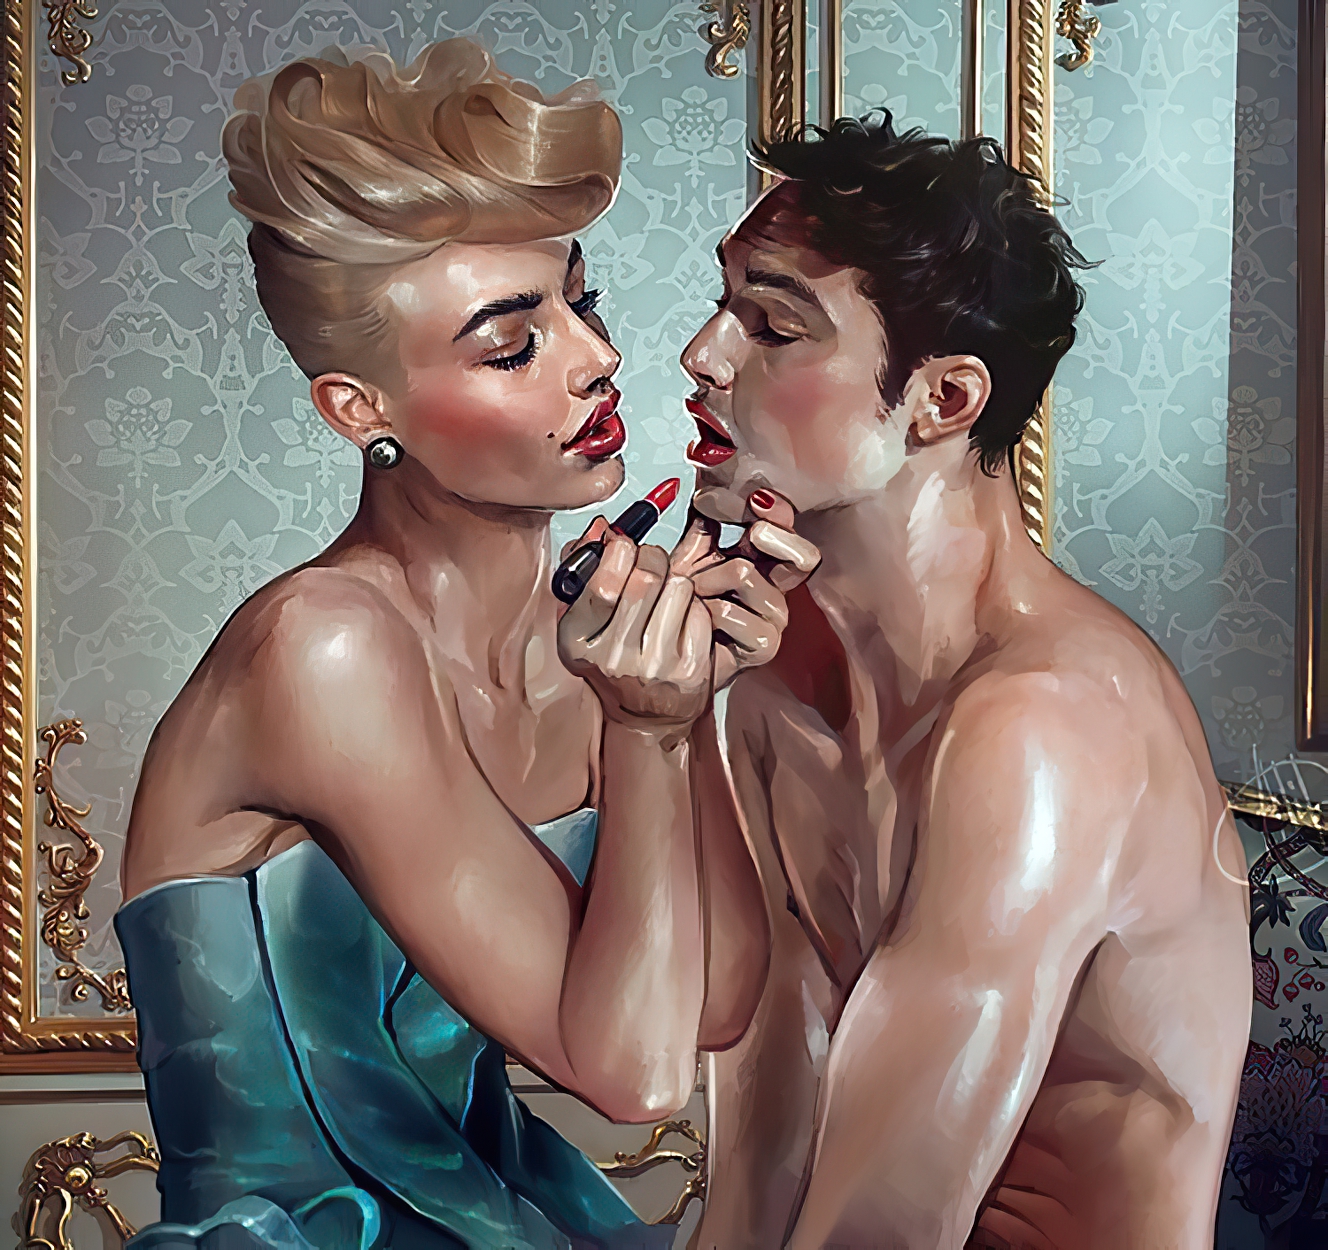 'My Beautiful Lady' by Ali Franco depicting woman in lingerie applying lipstick to feminized male slave in loving manner